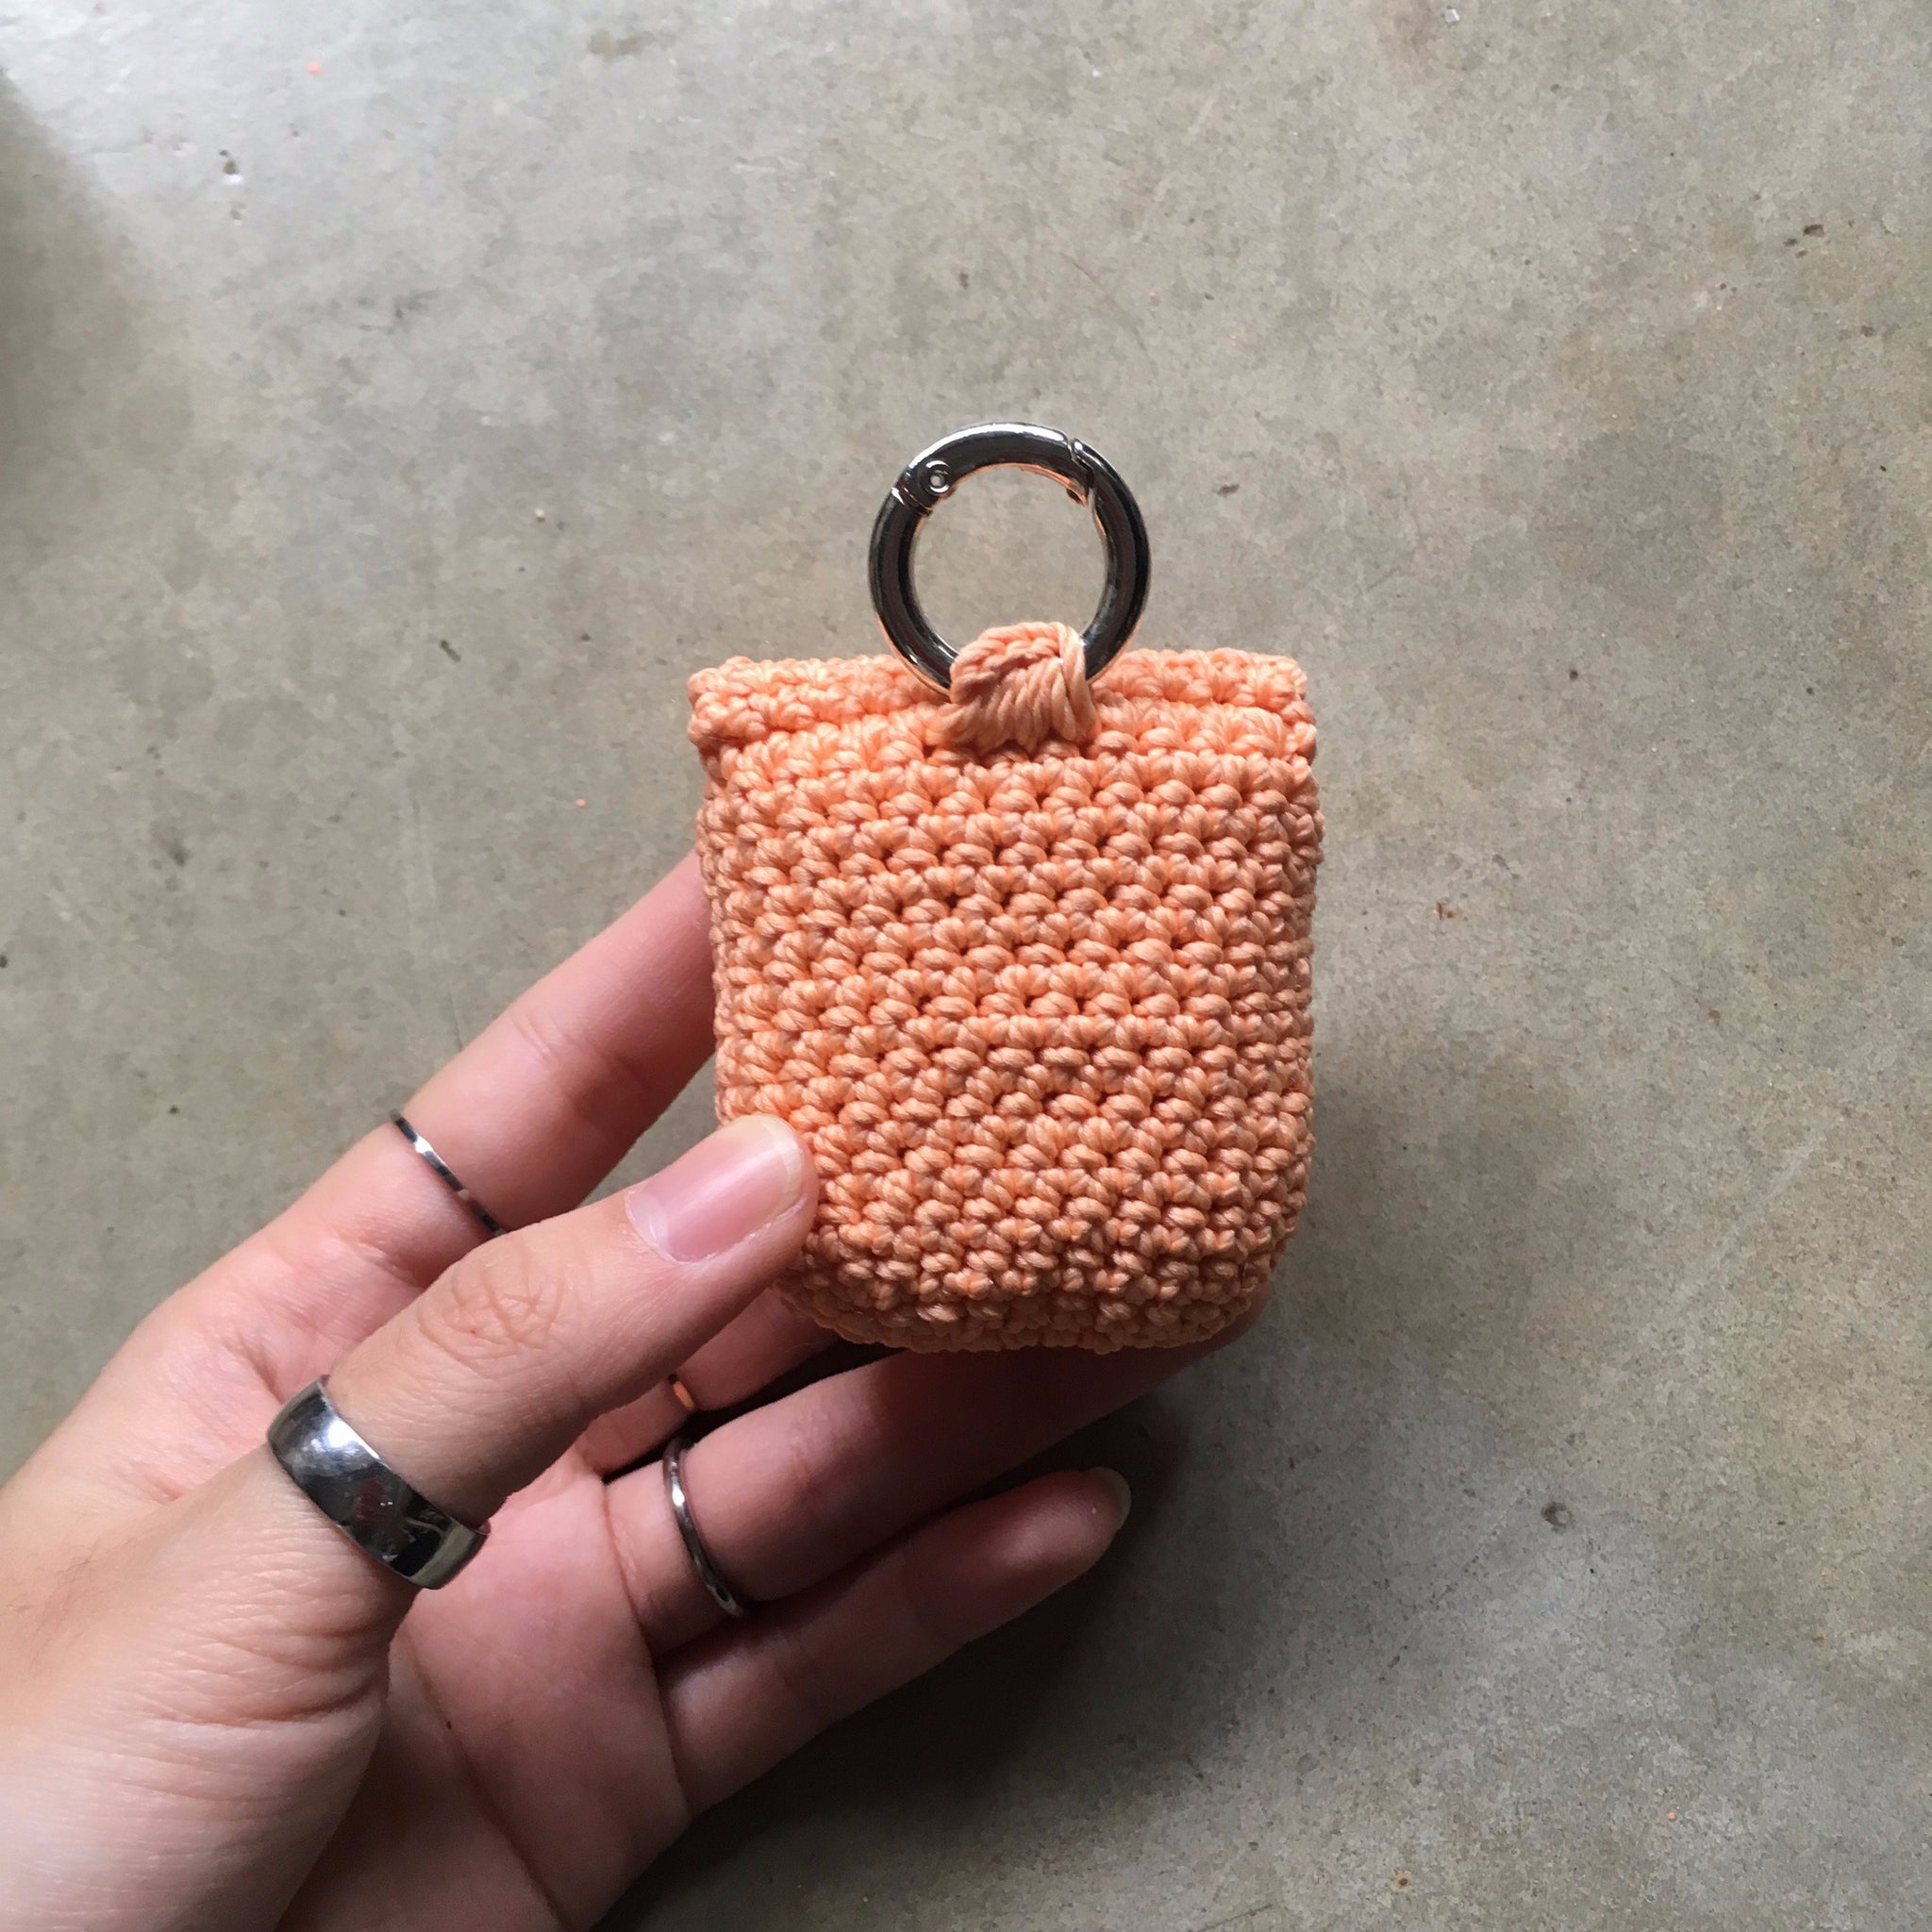 Airpods Case (Mac and Cheese)